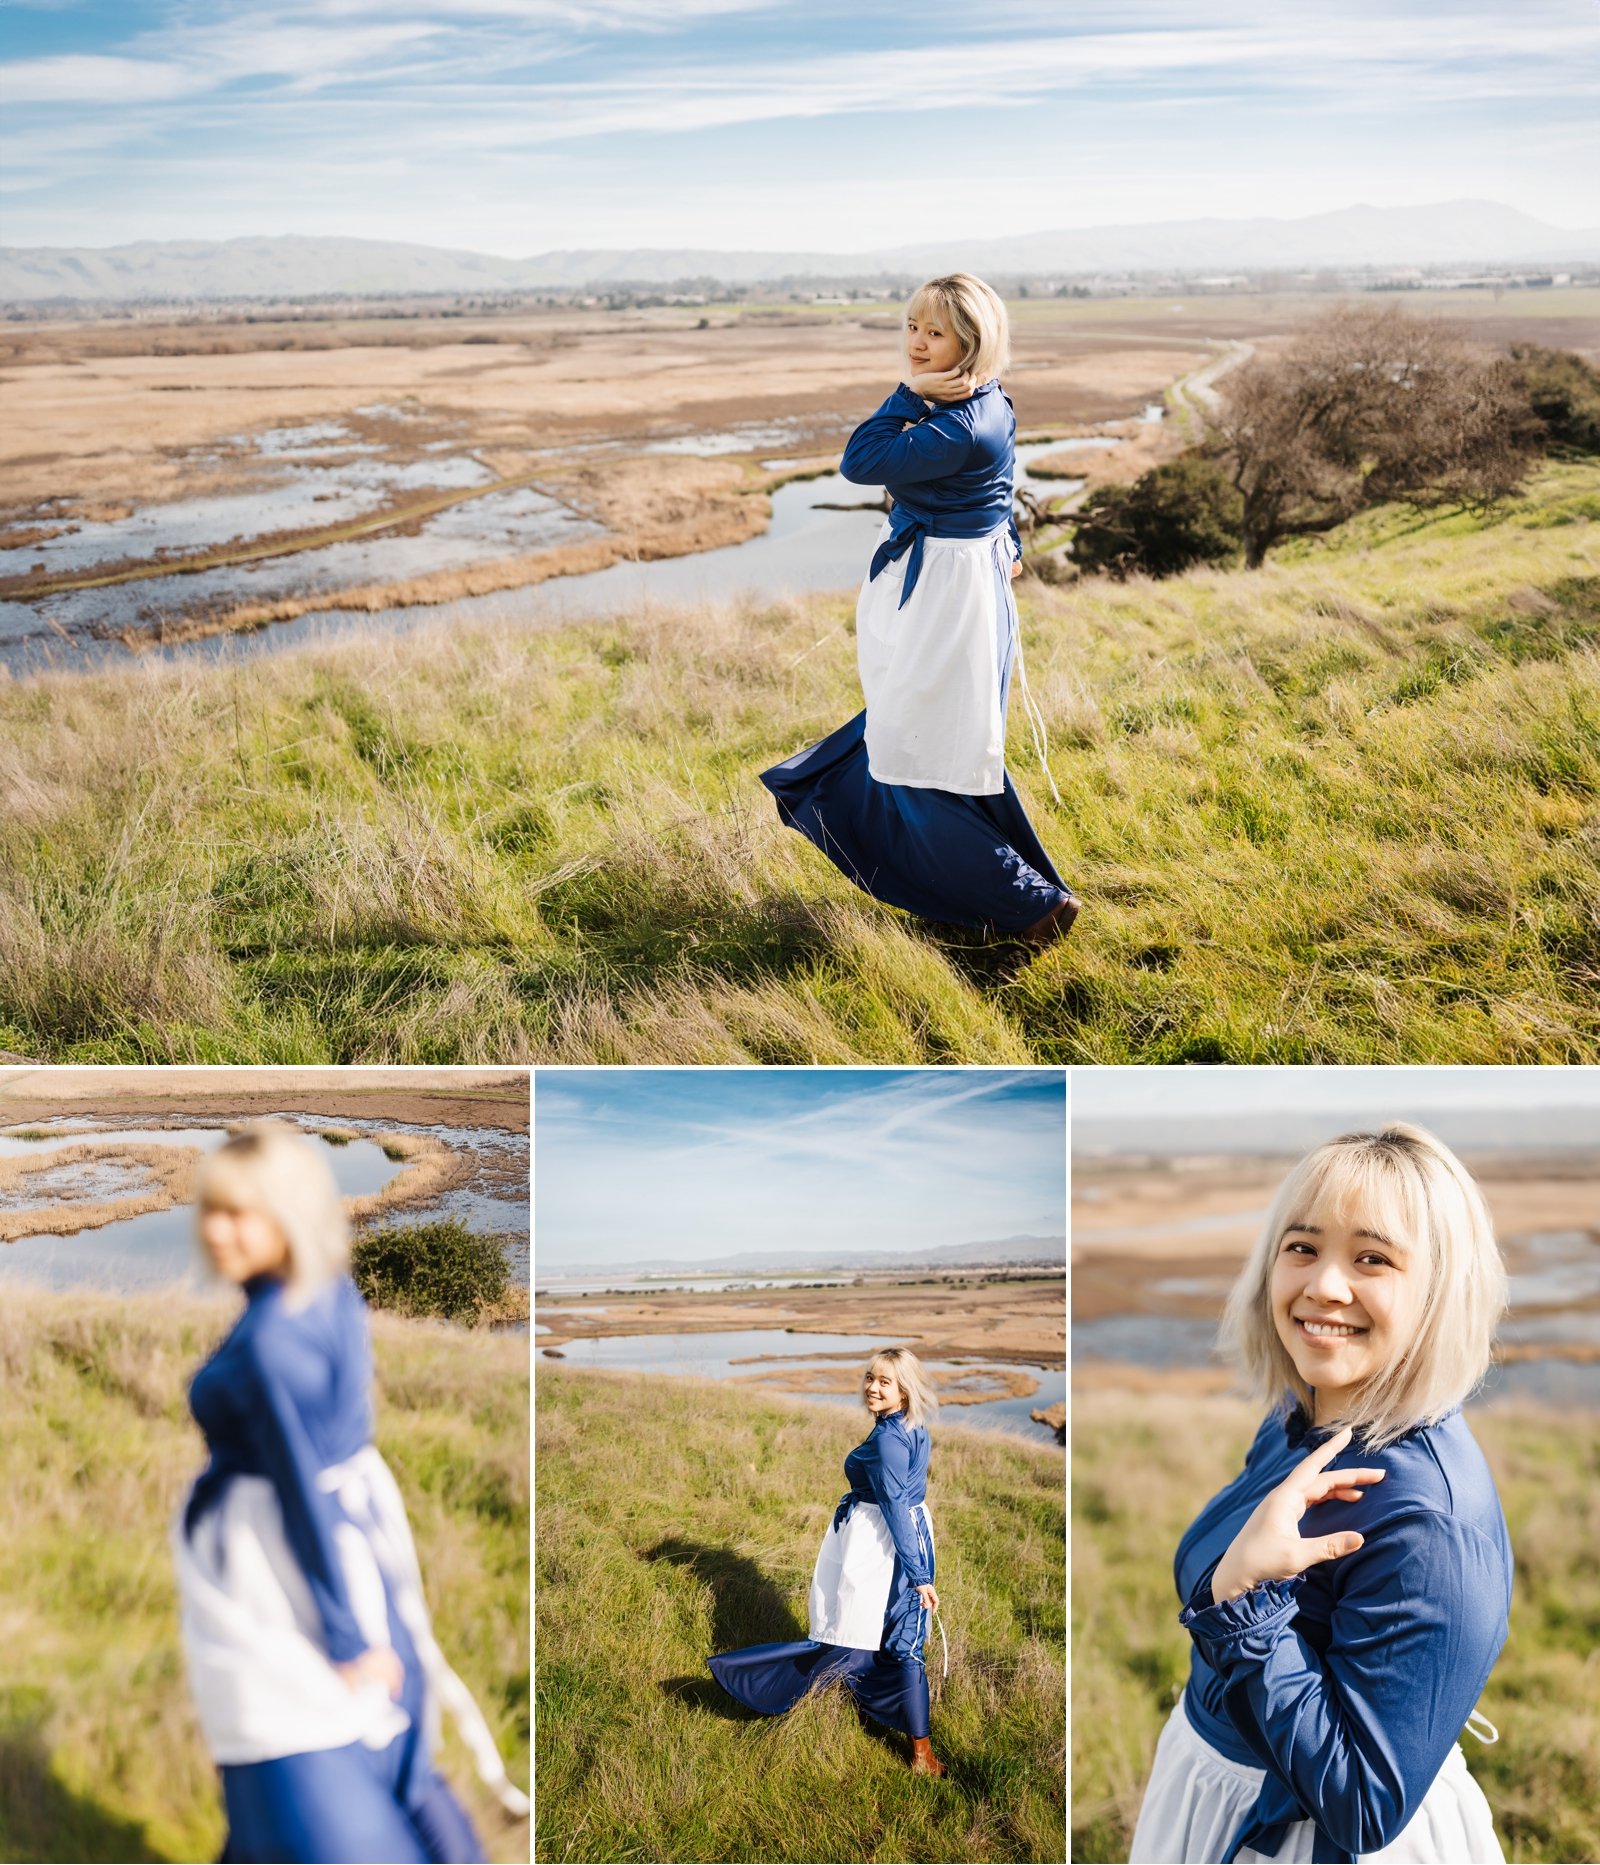 howl's moving castle sophie cosplay photoshoot bay area cosplay photographer 14.jpg